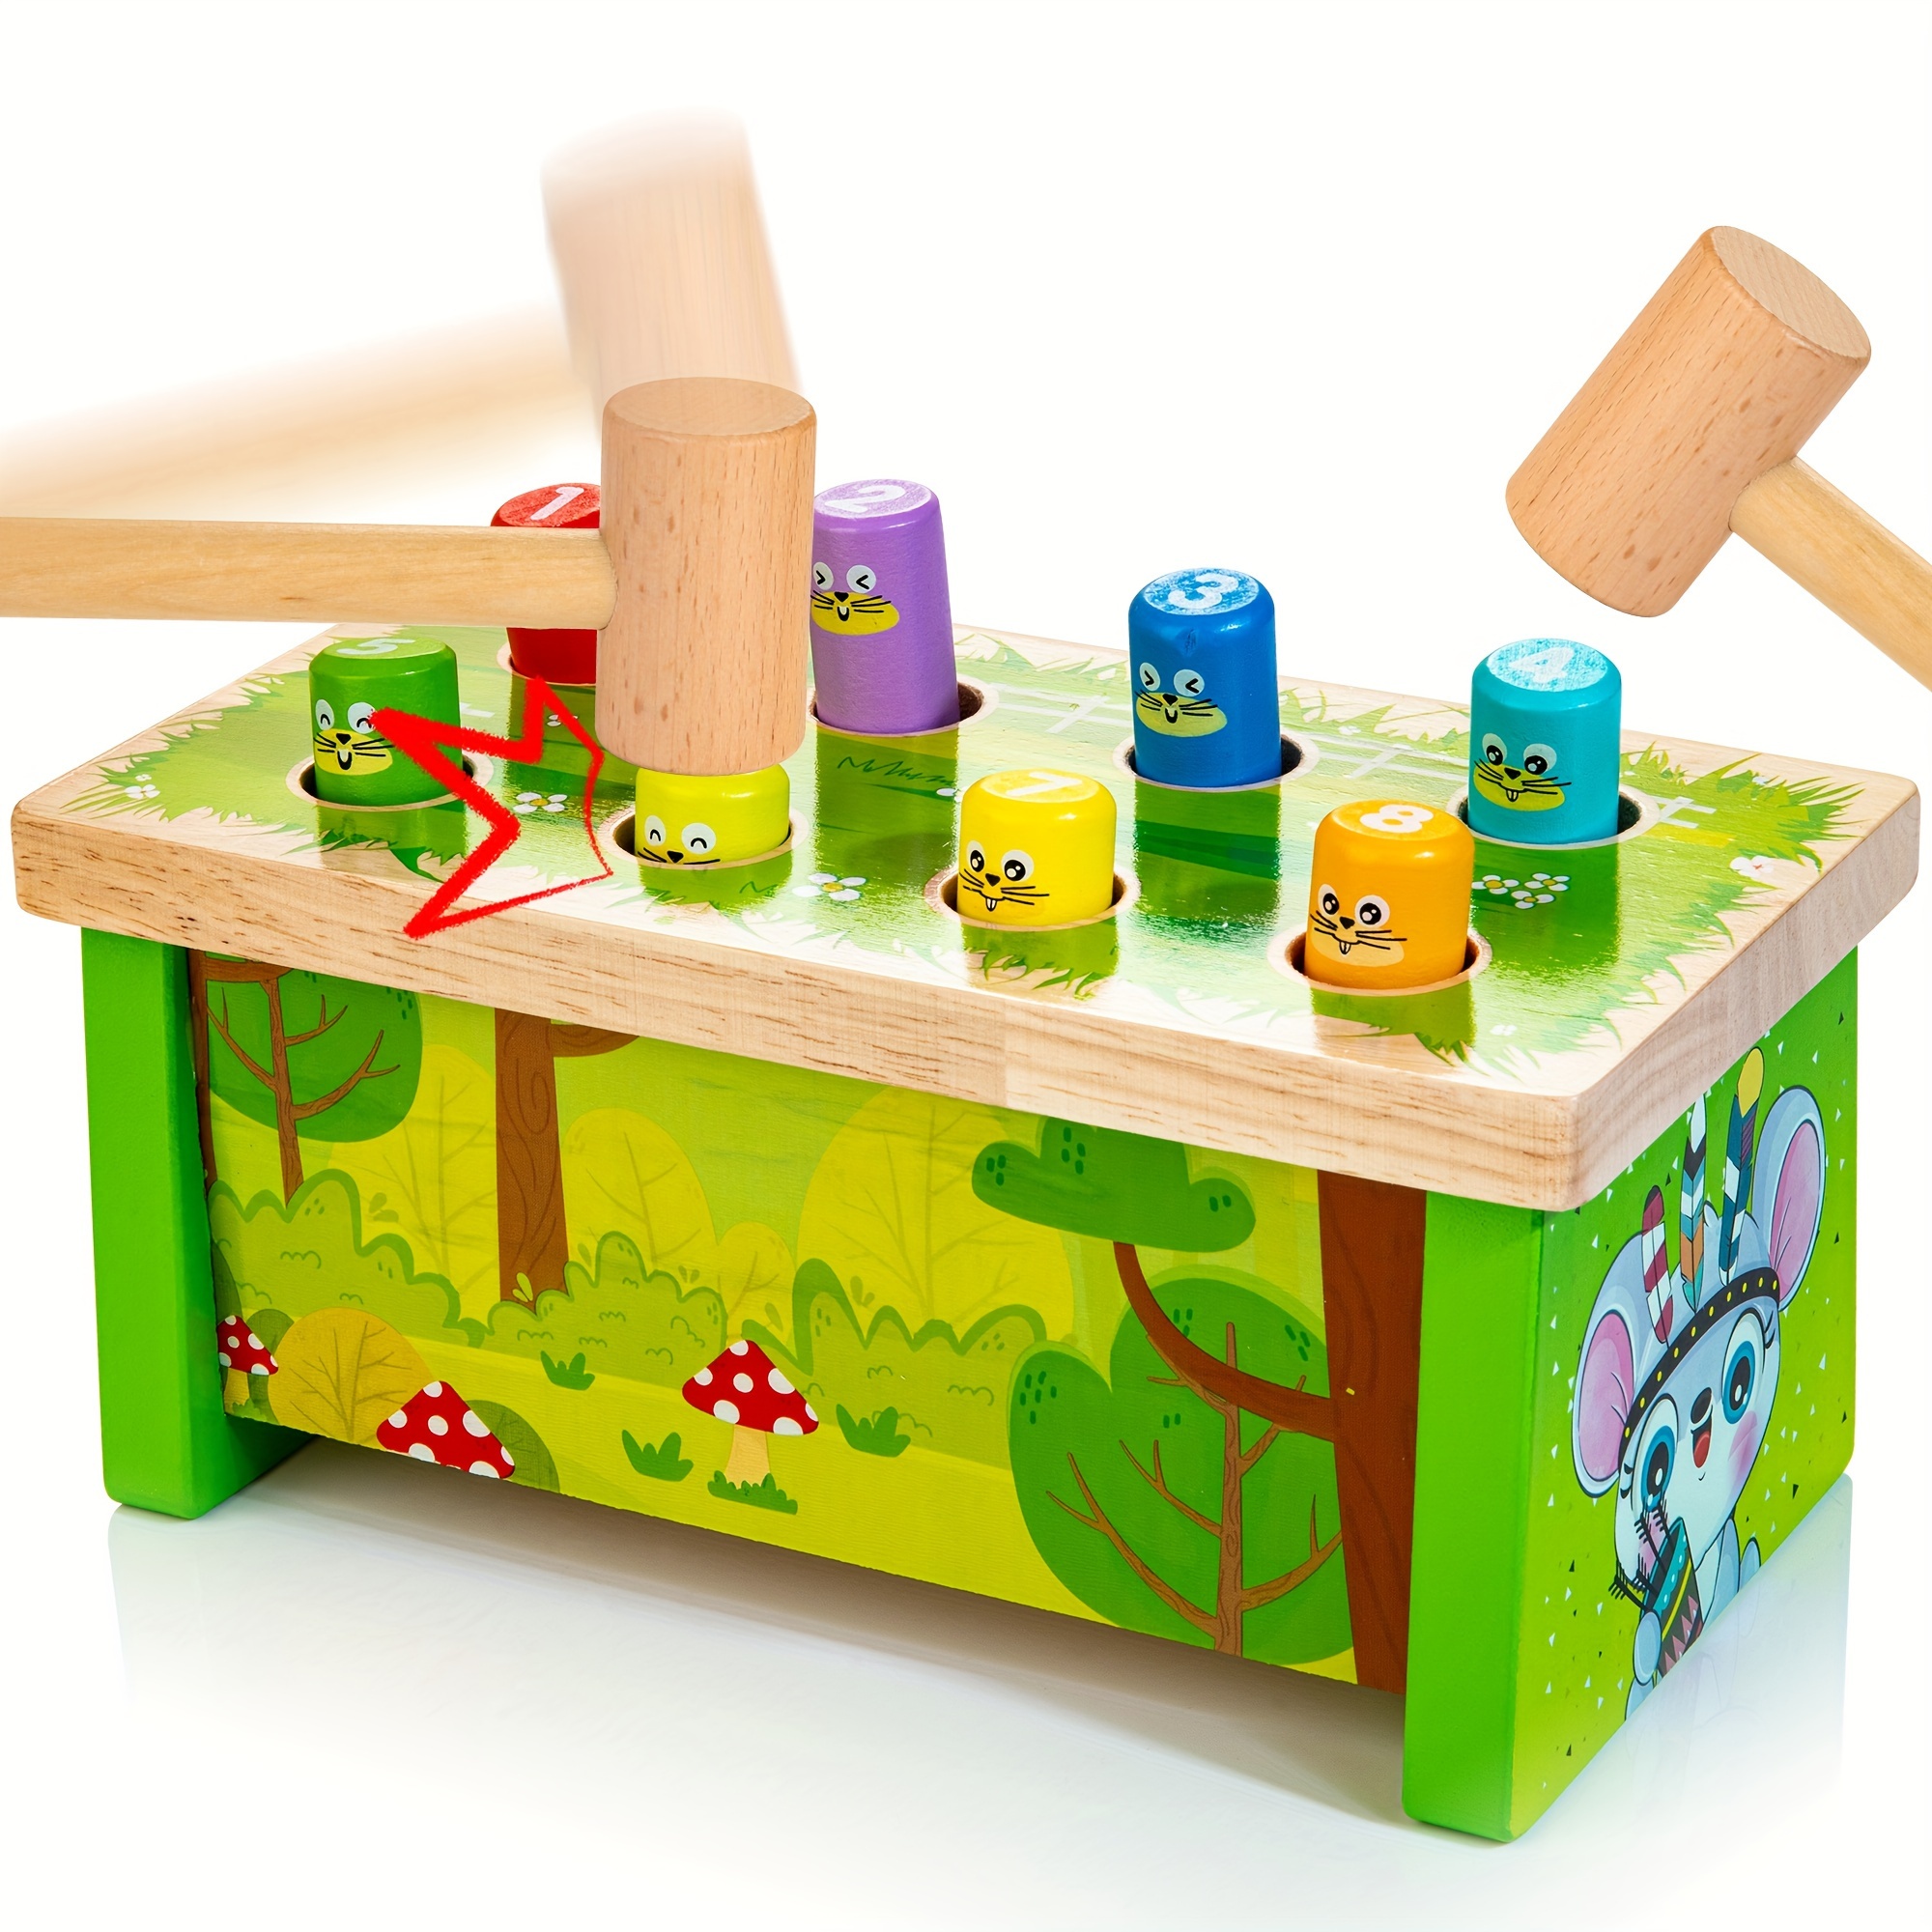 

Hammer Toy Pounding Bench Wooden Toy Game With 2 Mallets, Montessori Educational Toy Gift